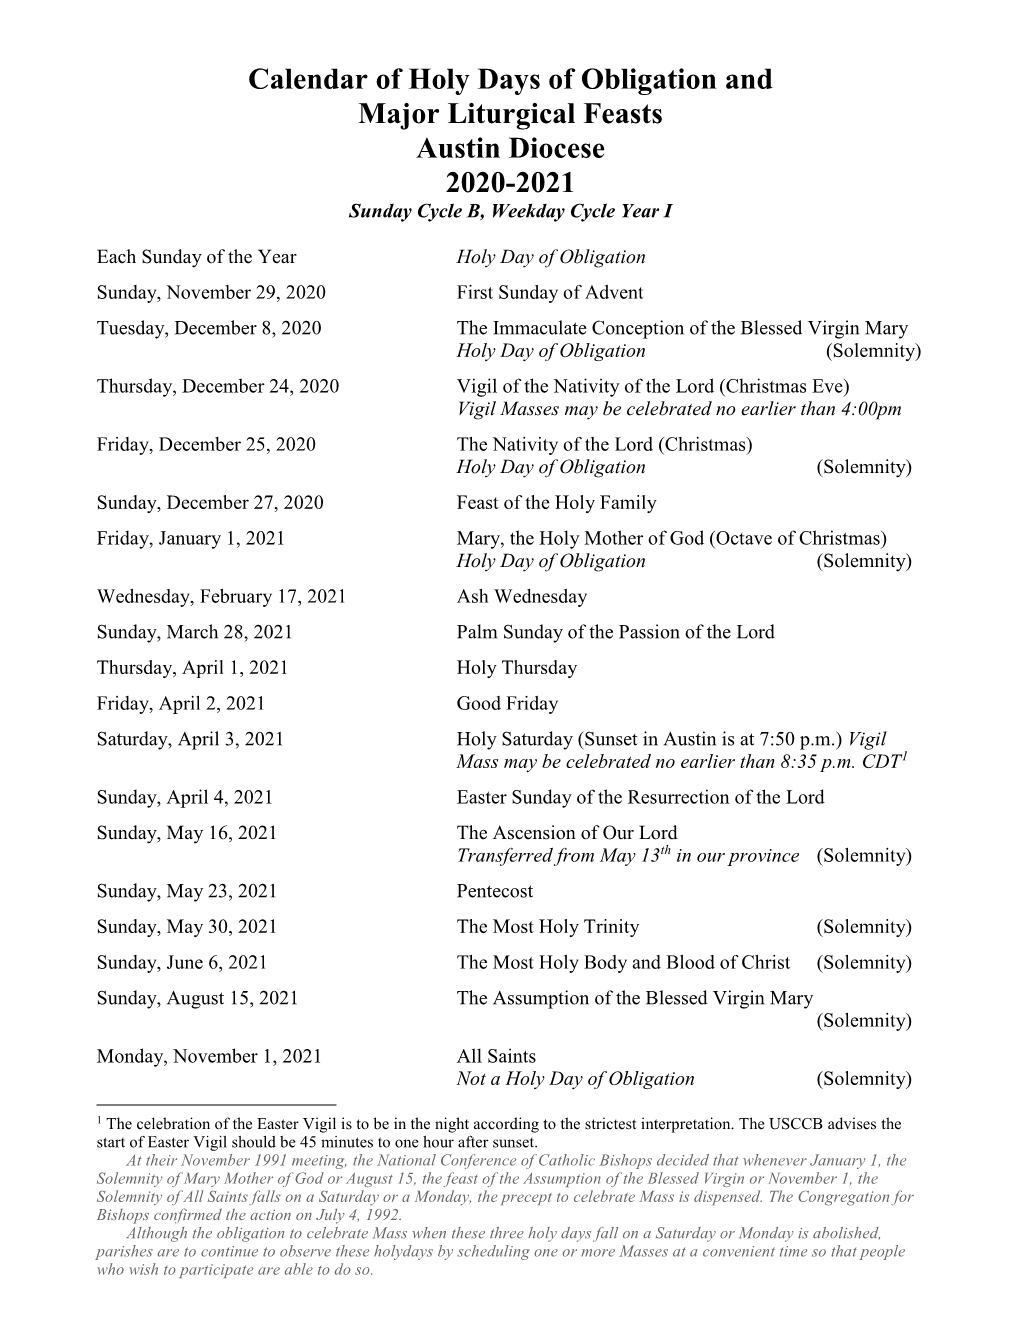 Calendar of Holy Days of Obligation and Major Liturgical Feasts Austin